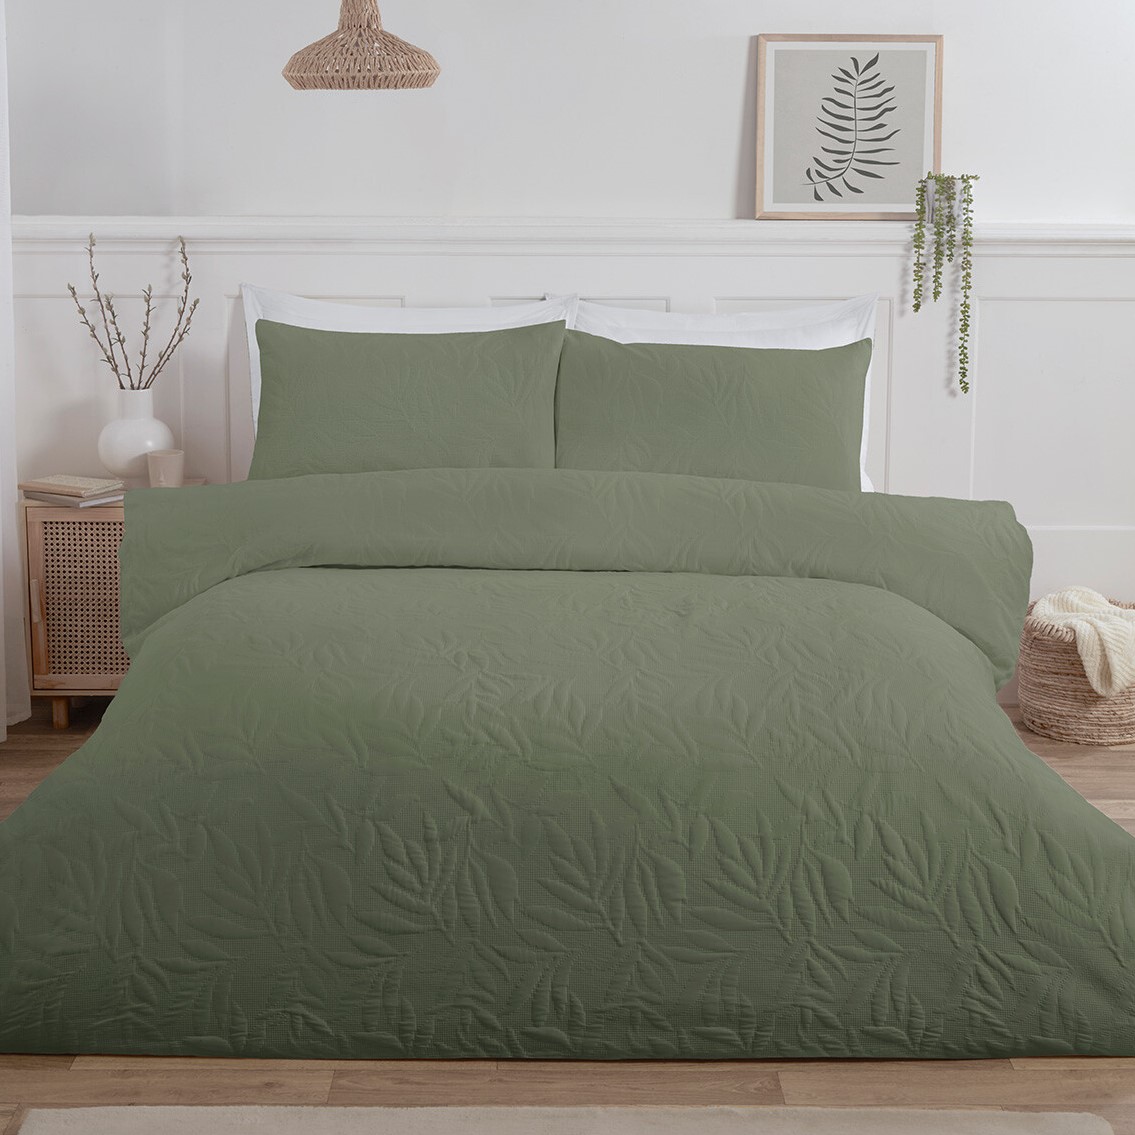 Avery Leaf Duvet Cover and Pillowcase Set - Olive Green / King Image 1